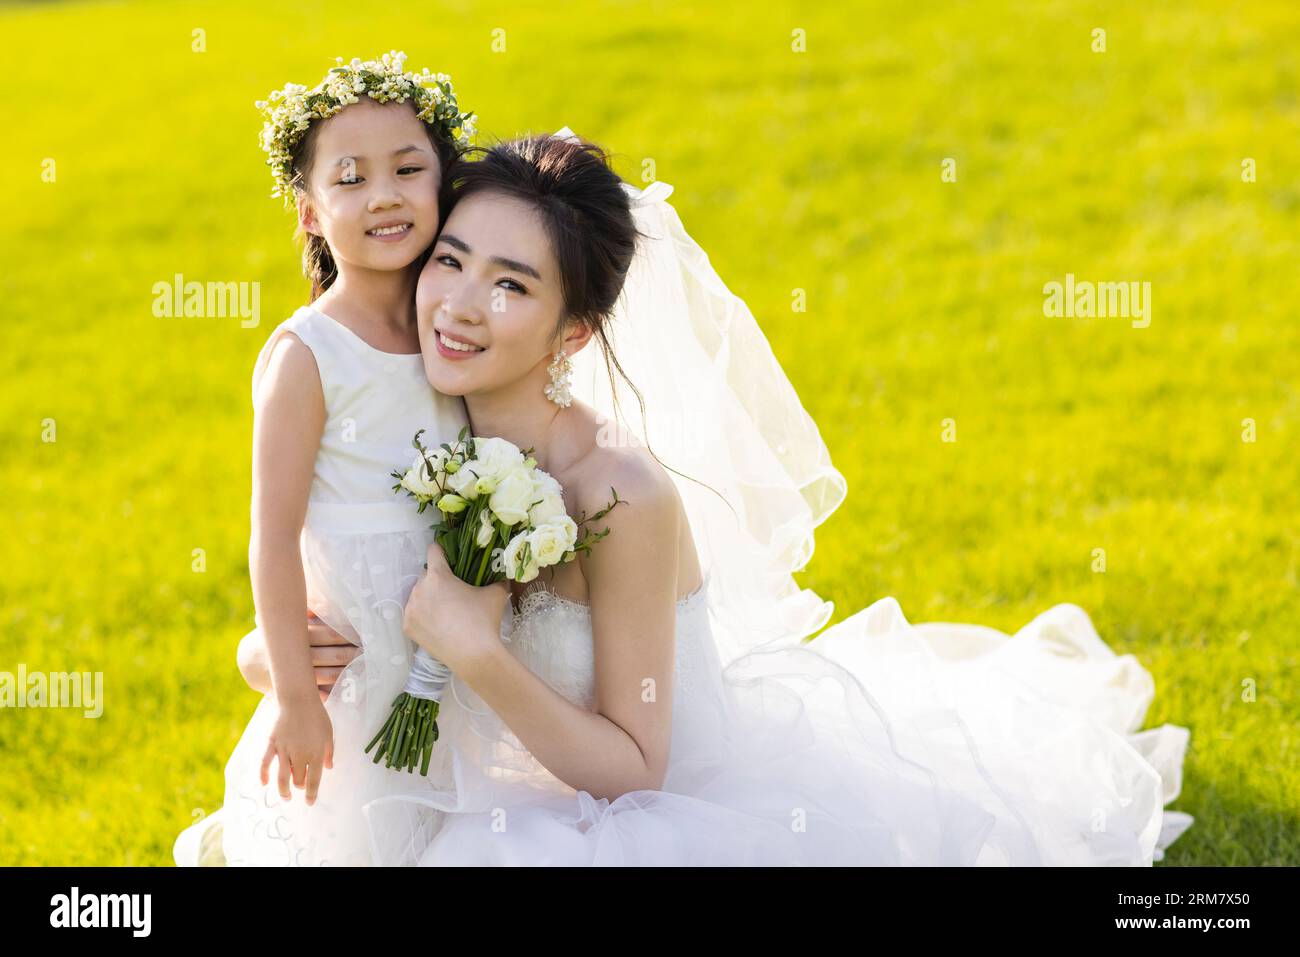 Beautiful bride with flower girl Stock Photo